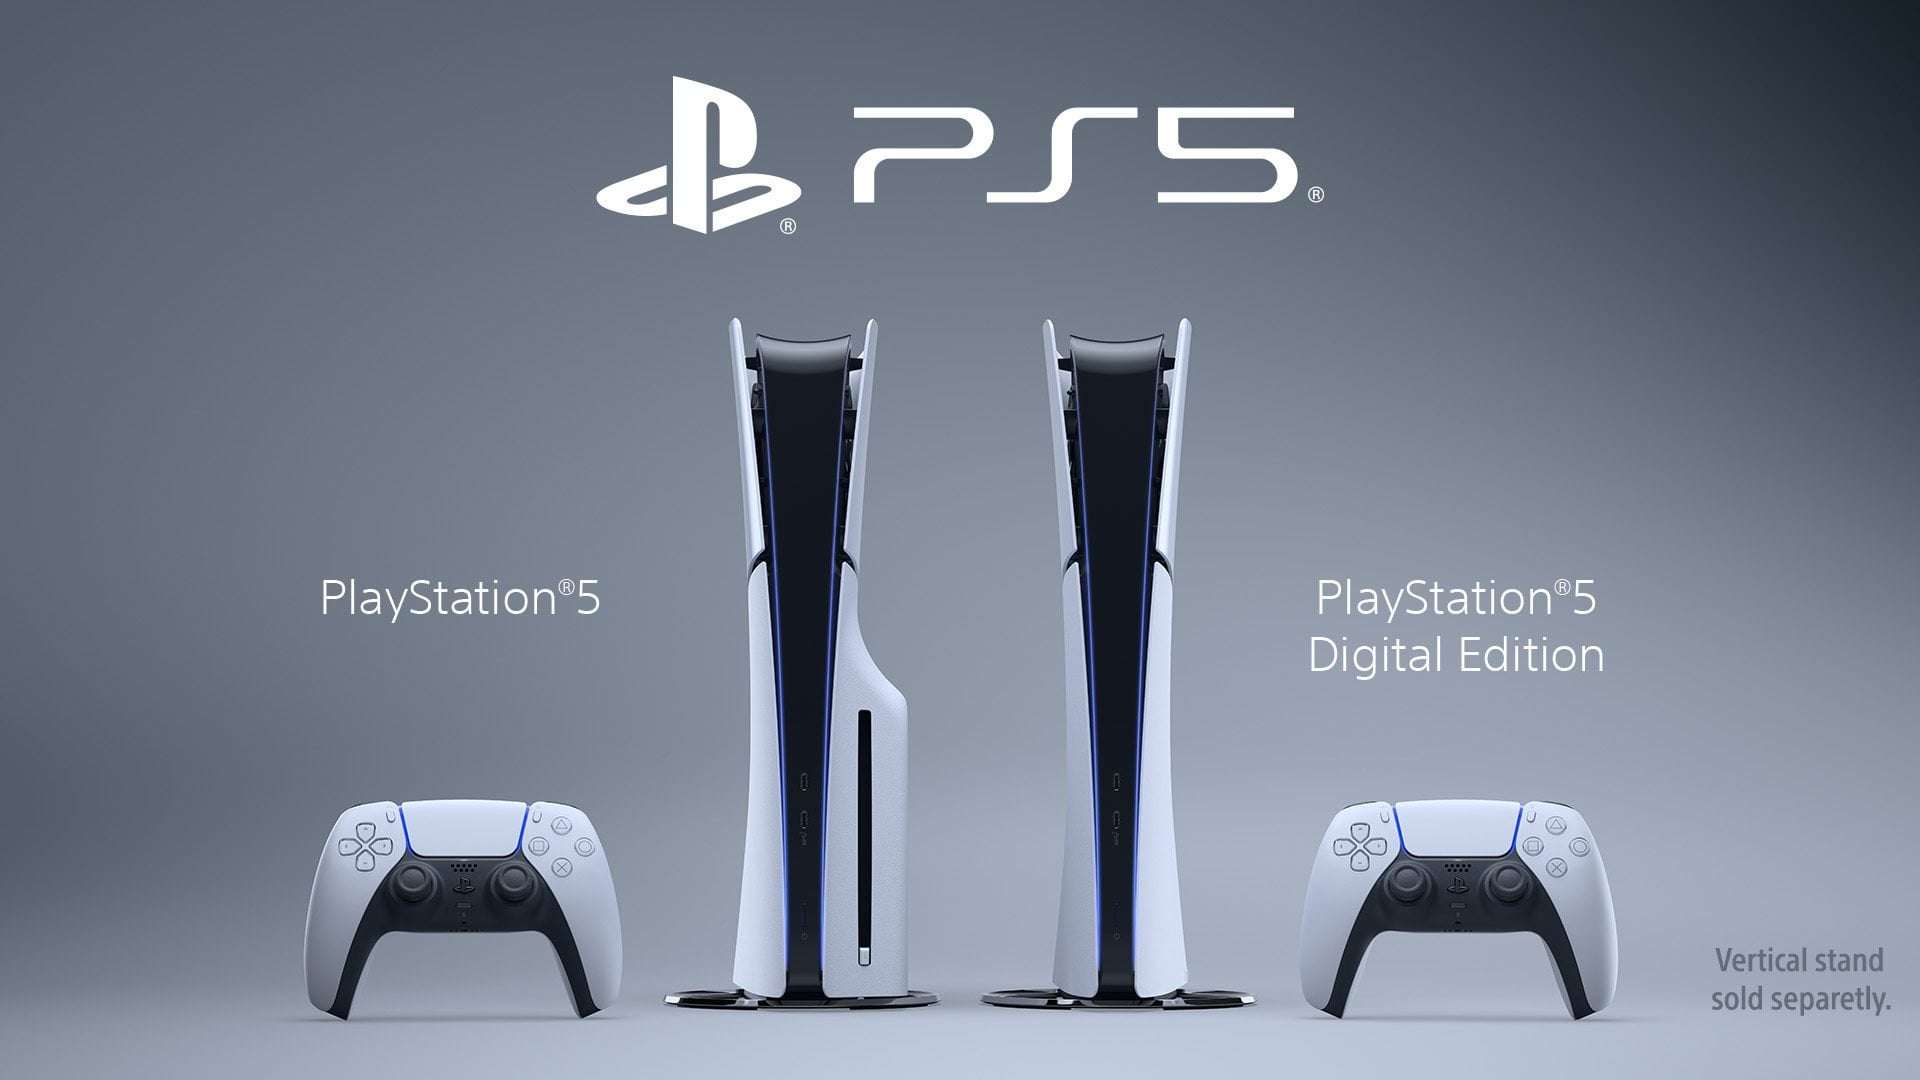 image for New look for PS5 console this holiday season